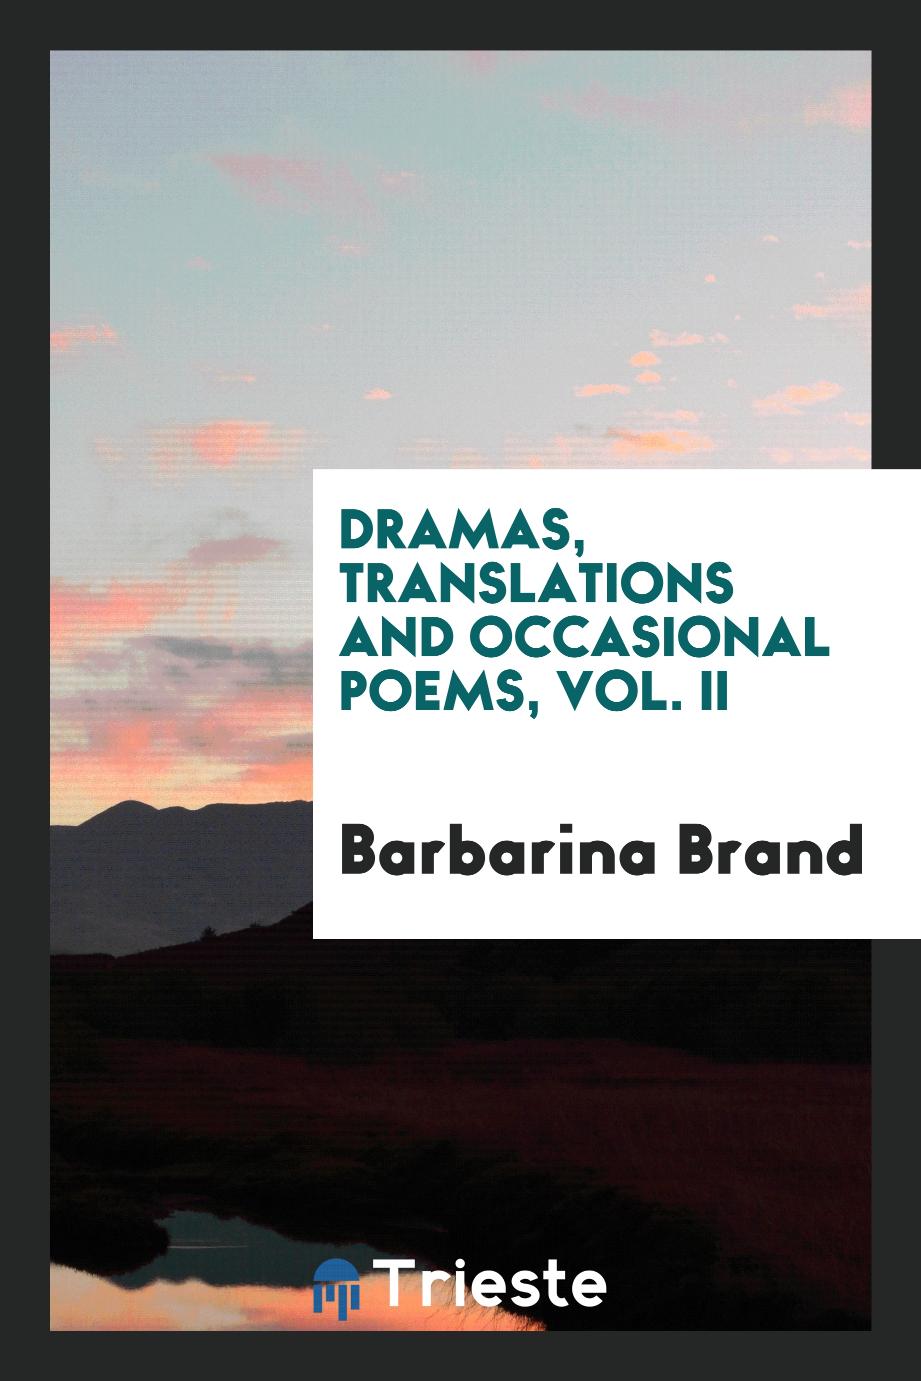 Dramas, Translations and Occasional Poems, Vol. II